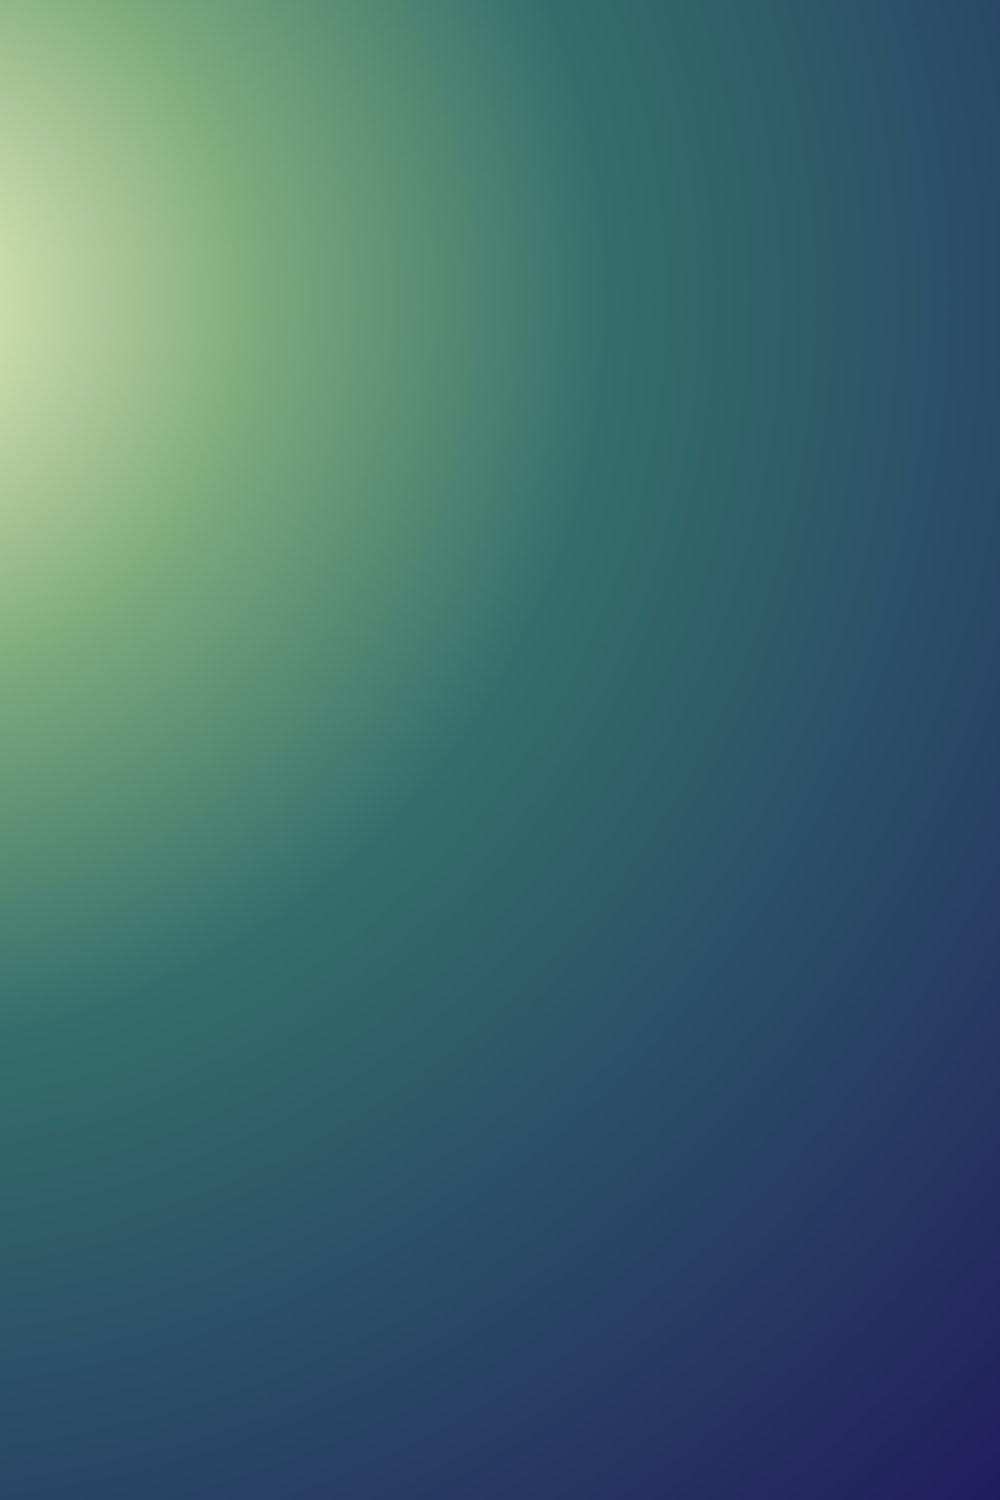 Light Blue and Green Wallpapers - Top Free Light Blue and Green ...